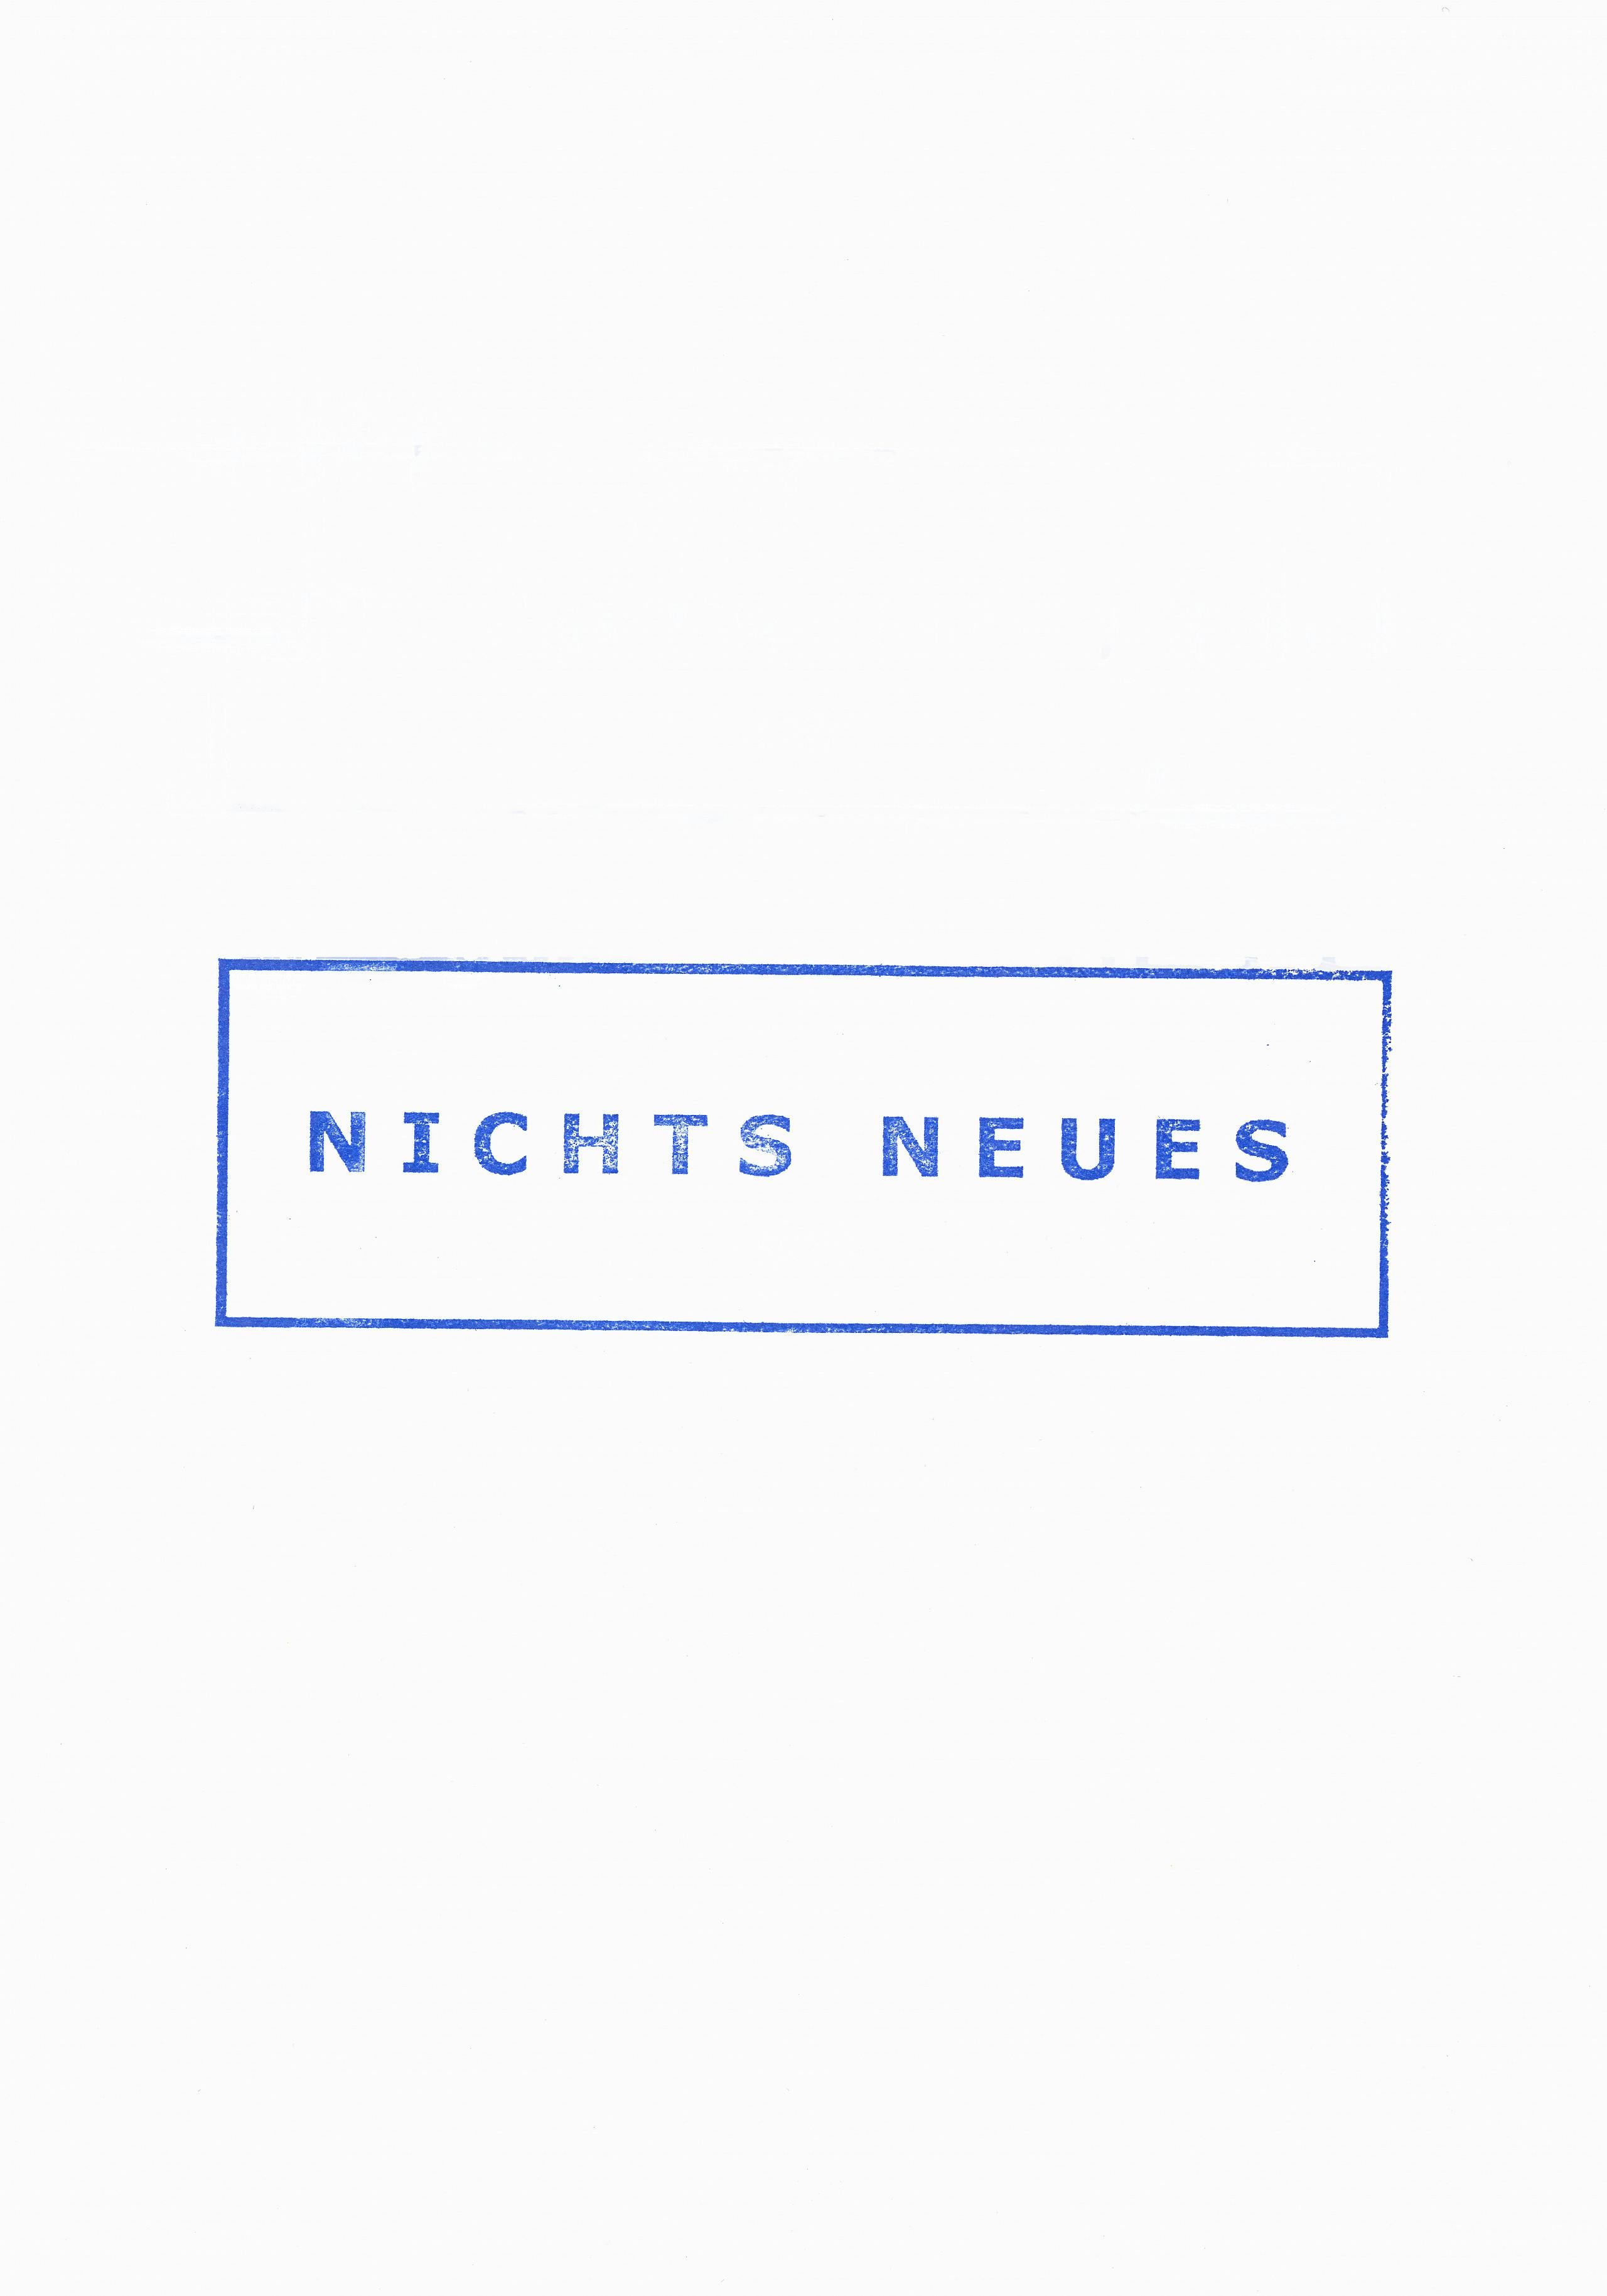 Two blue stamp prints on a white background. In capital letters, Nichts Neues is written in a rectangular frame, which means Nothing New in German.